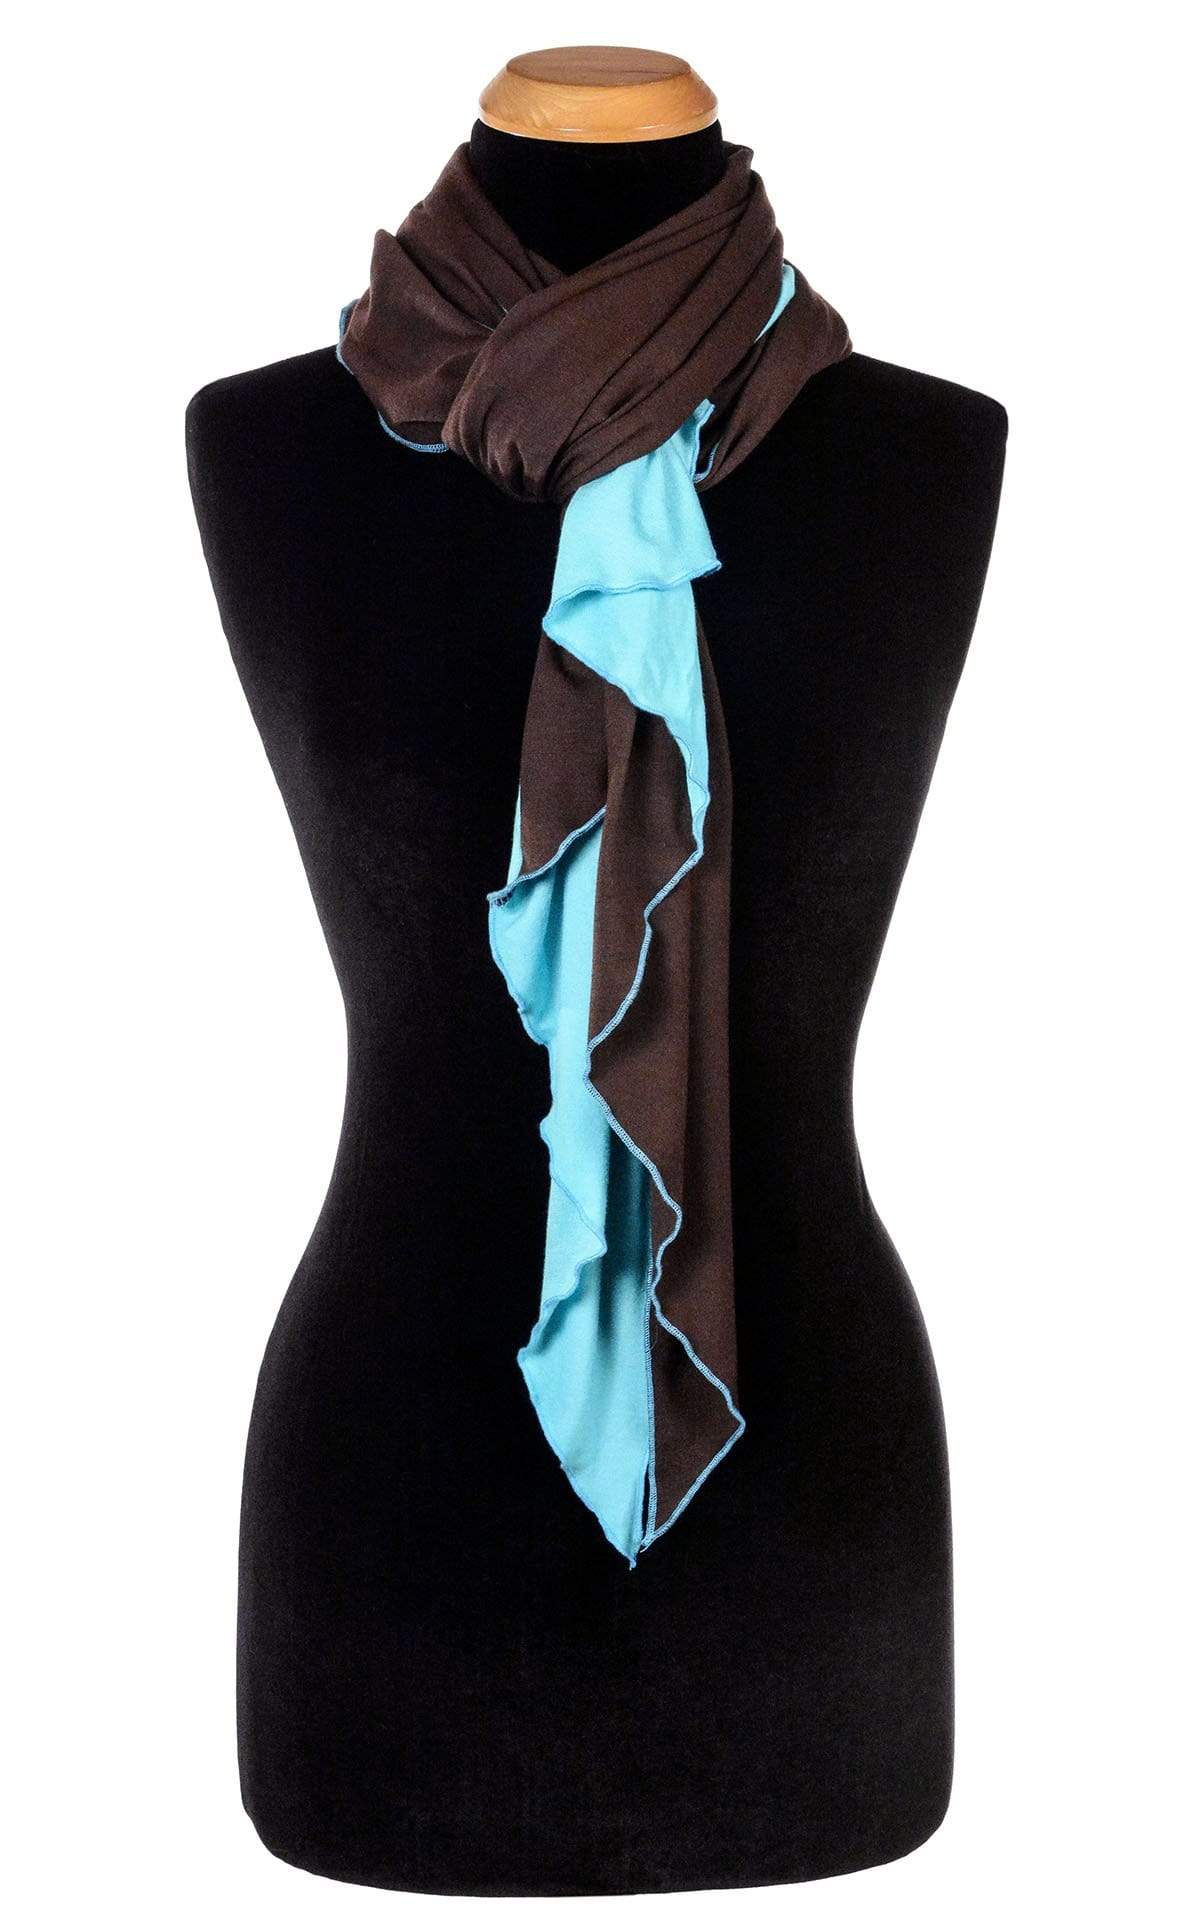 Ladies Large Handkerchief Scarf, Wrap jersey knit fabric on a mannequin looped in fornt | Terra W/ Ocean of Emptiness, Chocolate brown and Light Blue| Handmade in Seattle WA | Pandemonium Millinery